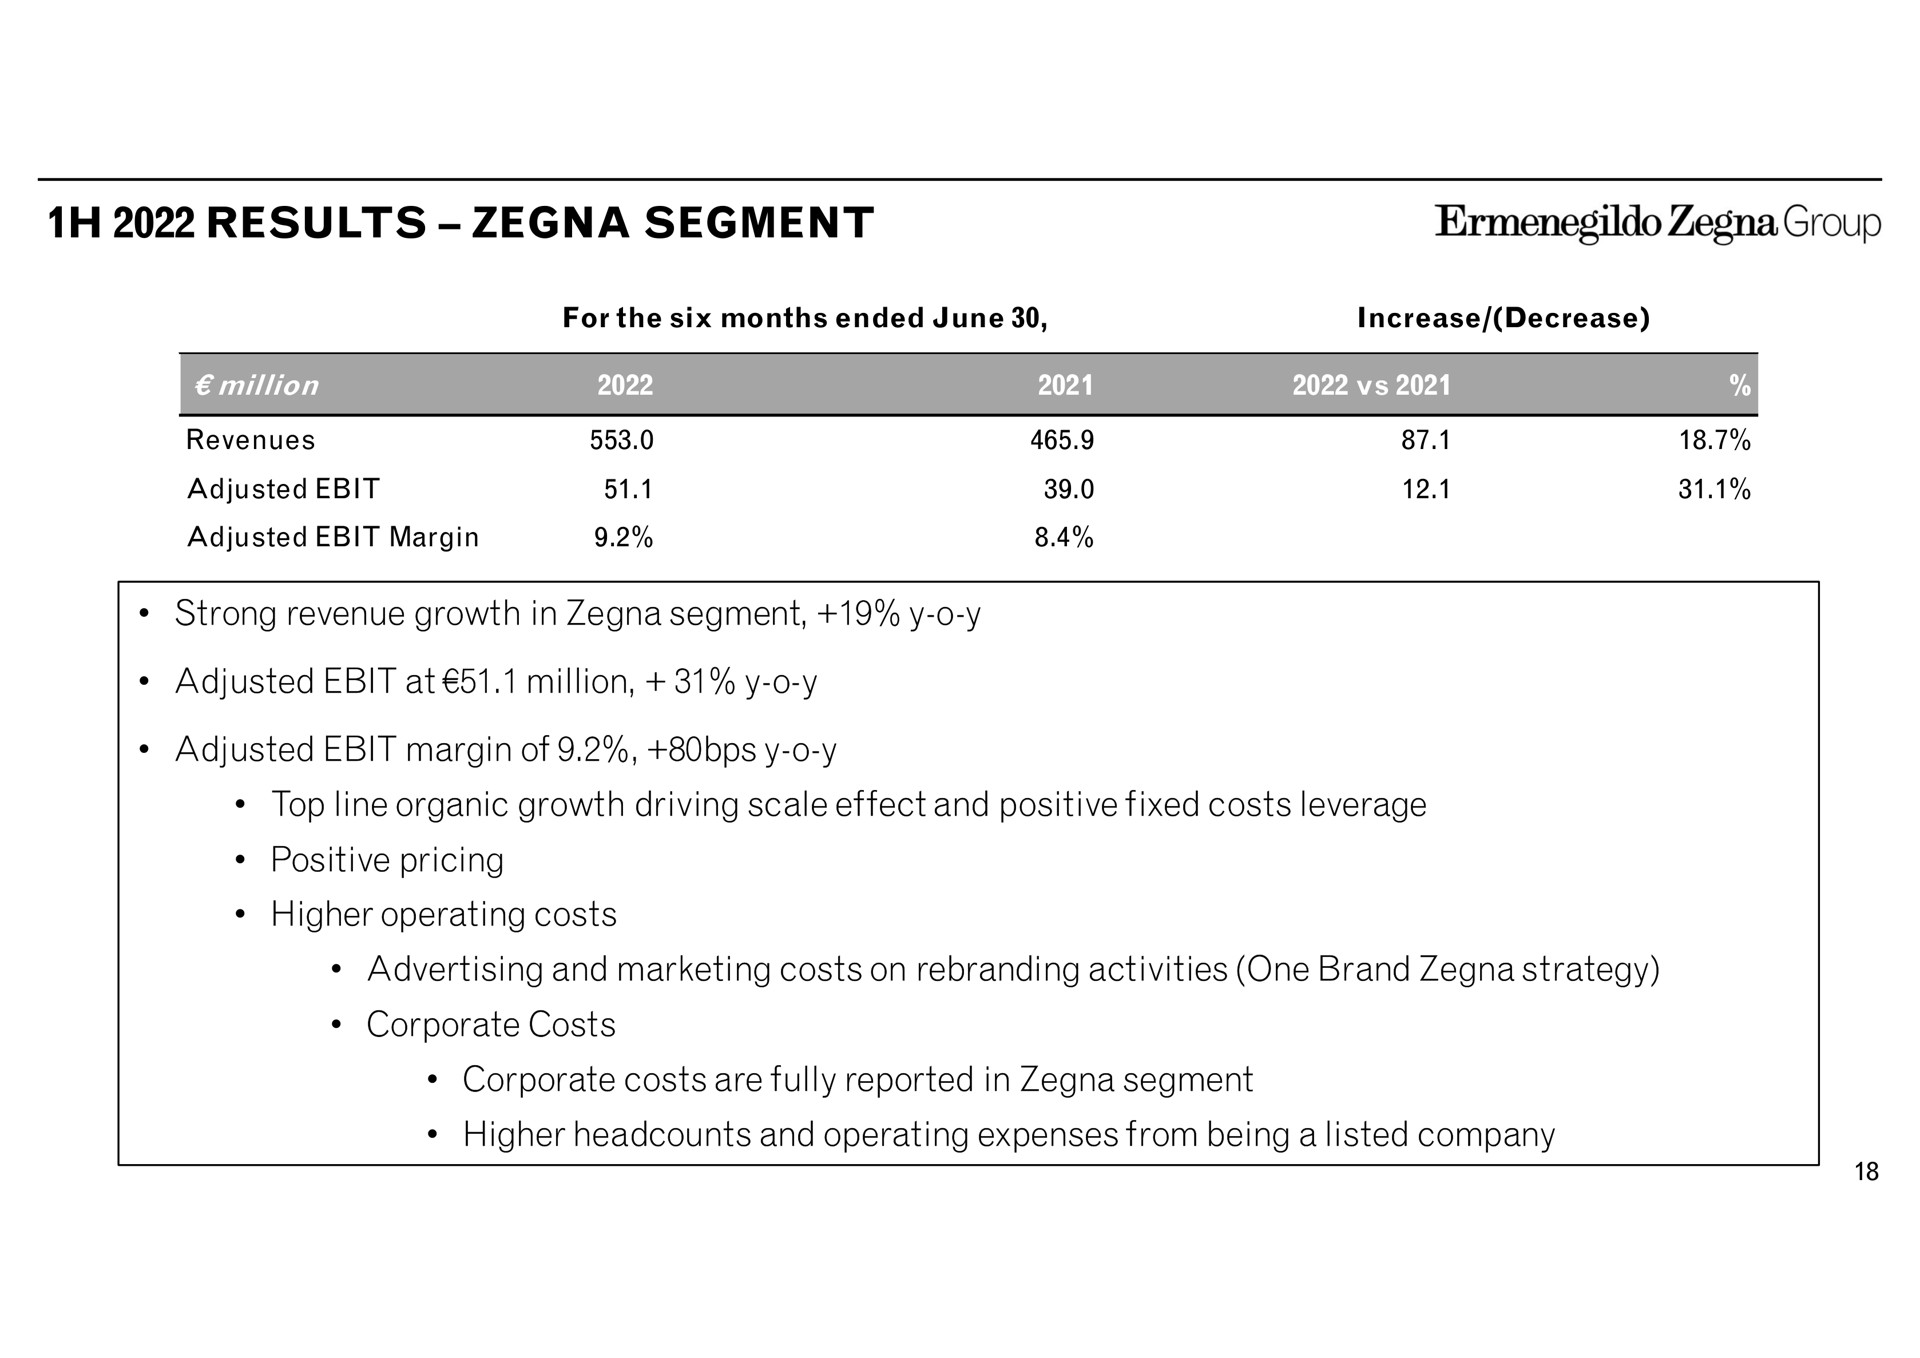 results segment strong revenue growth in segment adjusted at million adjusted margin of top line organic growth driving scale effect and positive fixed costs leverage positive pricing higher operating costs advertising and marketing costs on activities one brand strategy corporate costs corporate costs are fully reported in segment higher and operating expenses from being a listed company group for the six months ended june increase decrease revenues | Zegna